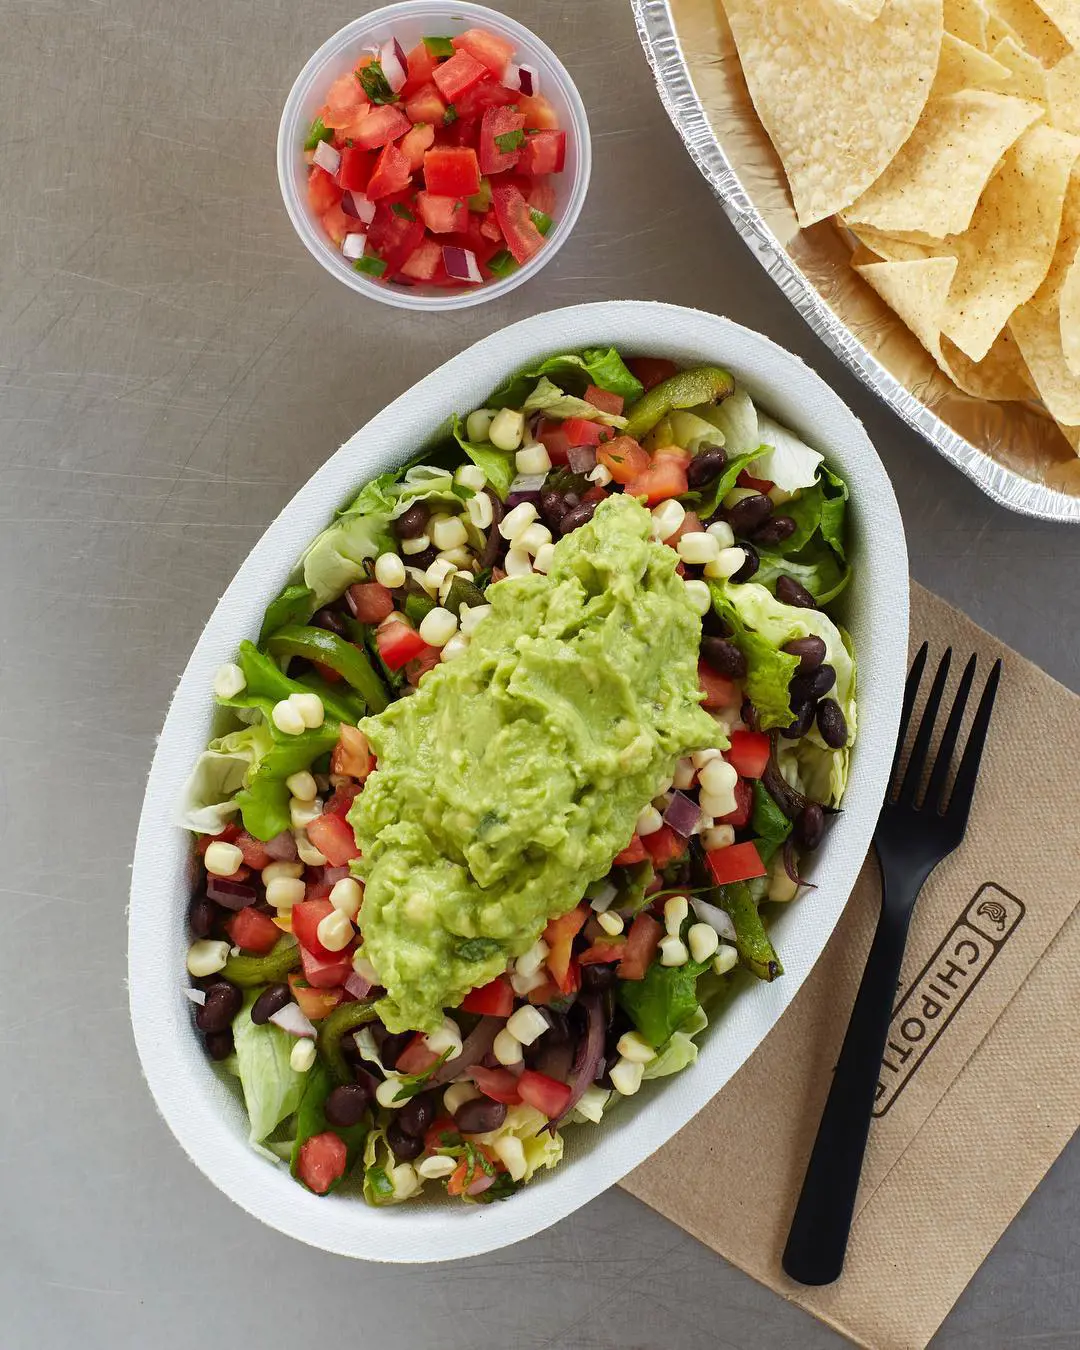 Chipotle is the best option for a healthy fast food to meet your cravings